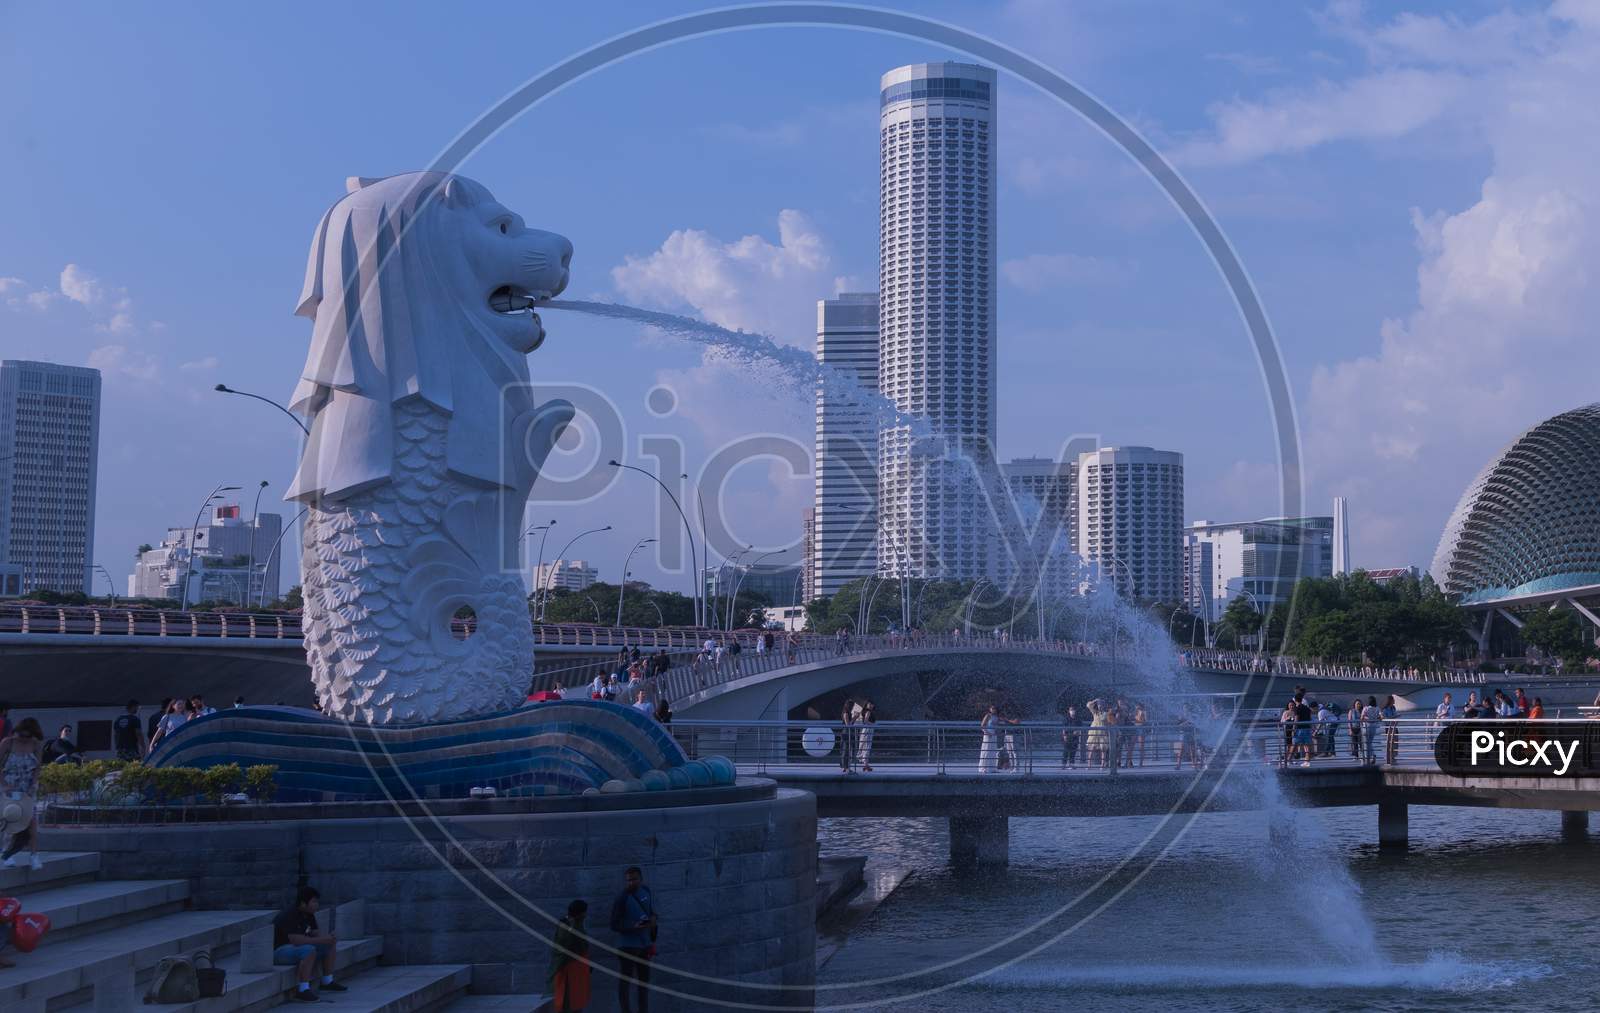 The Merlion Statue Of Singapore